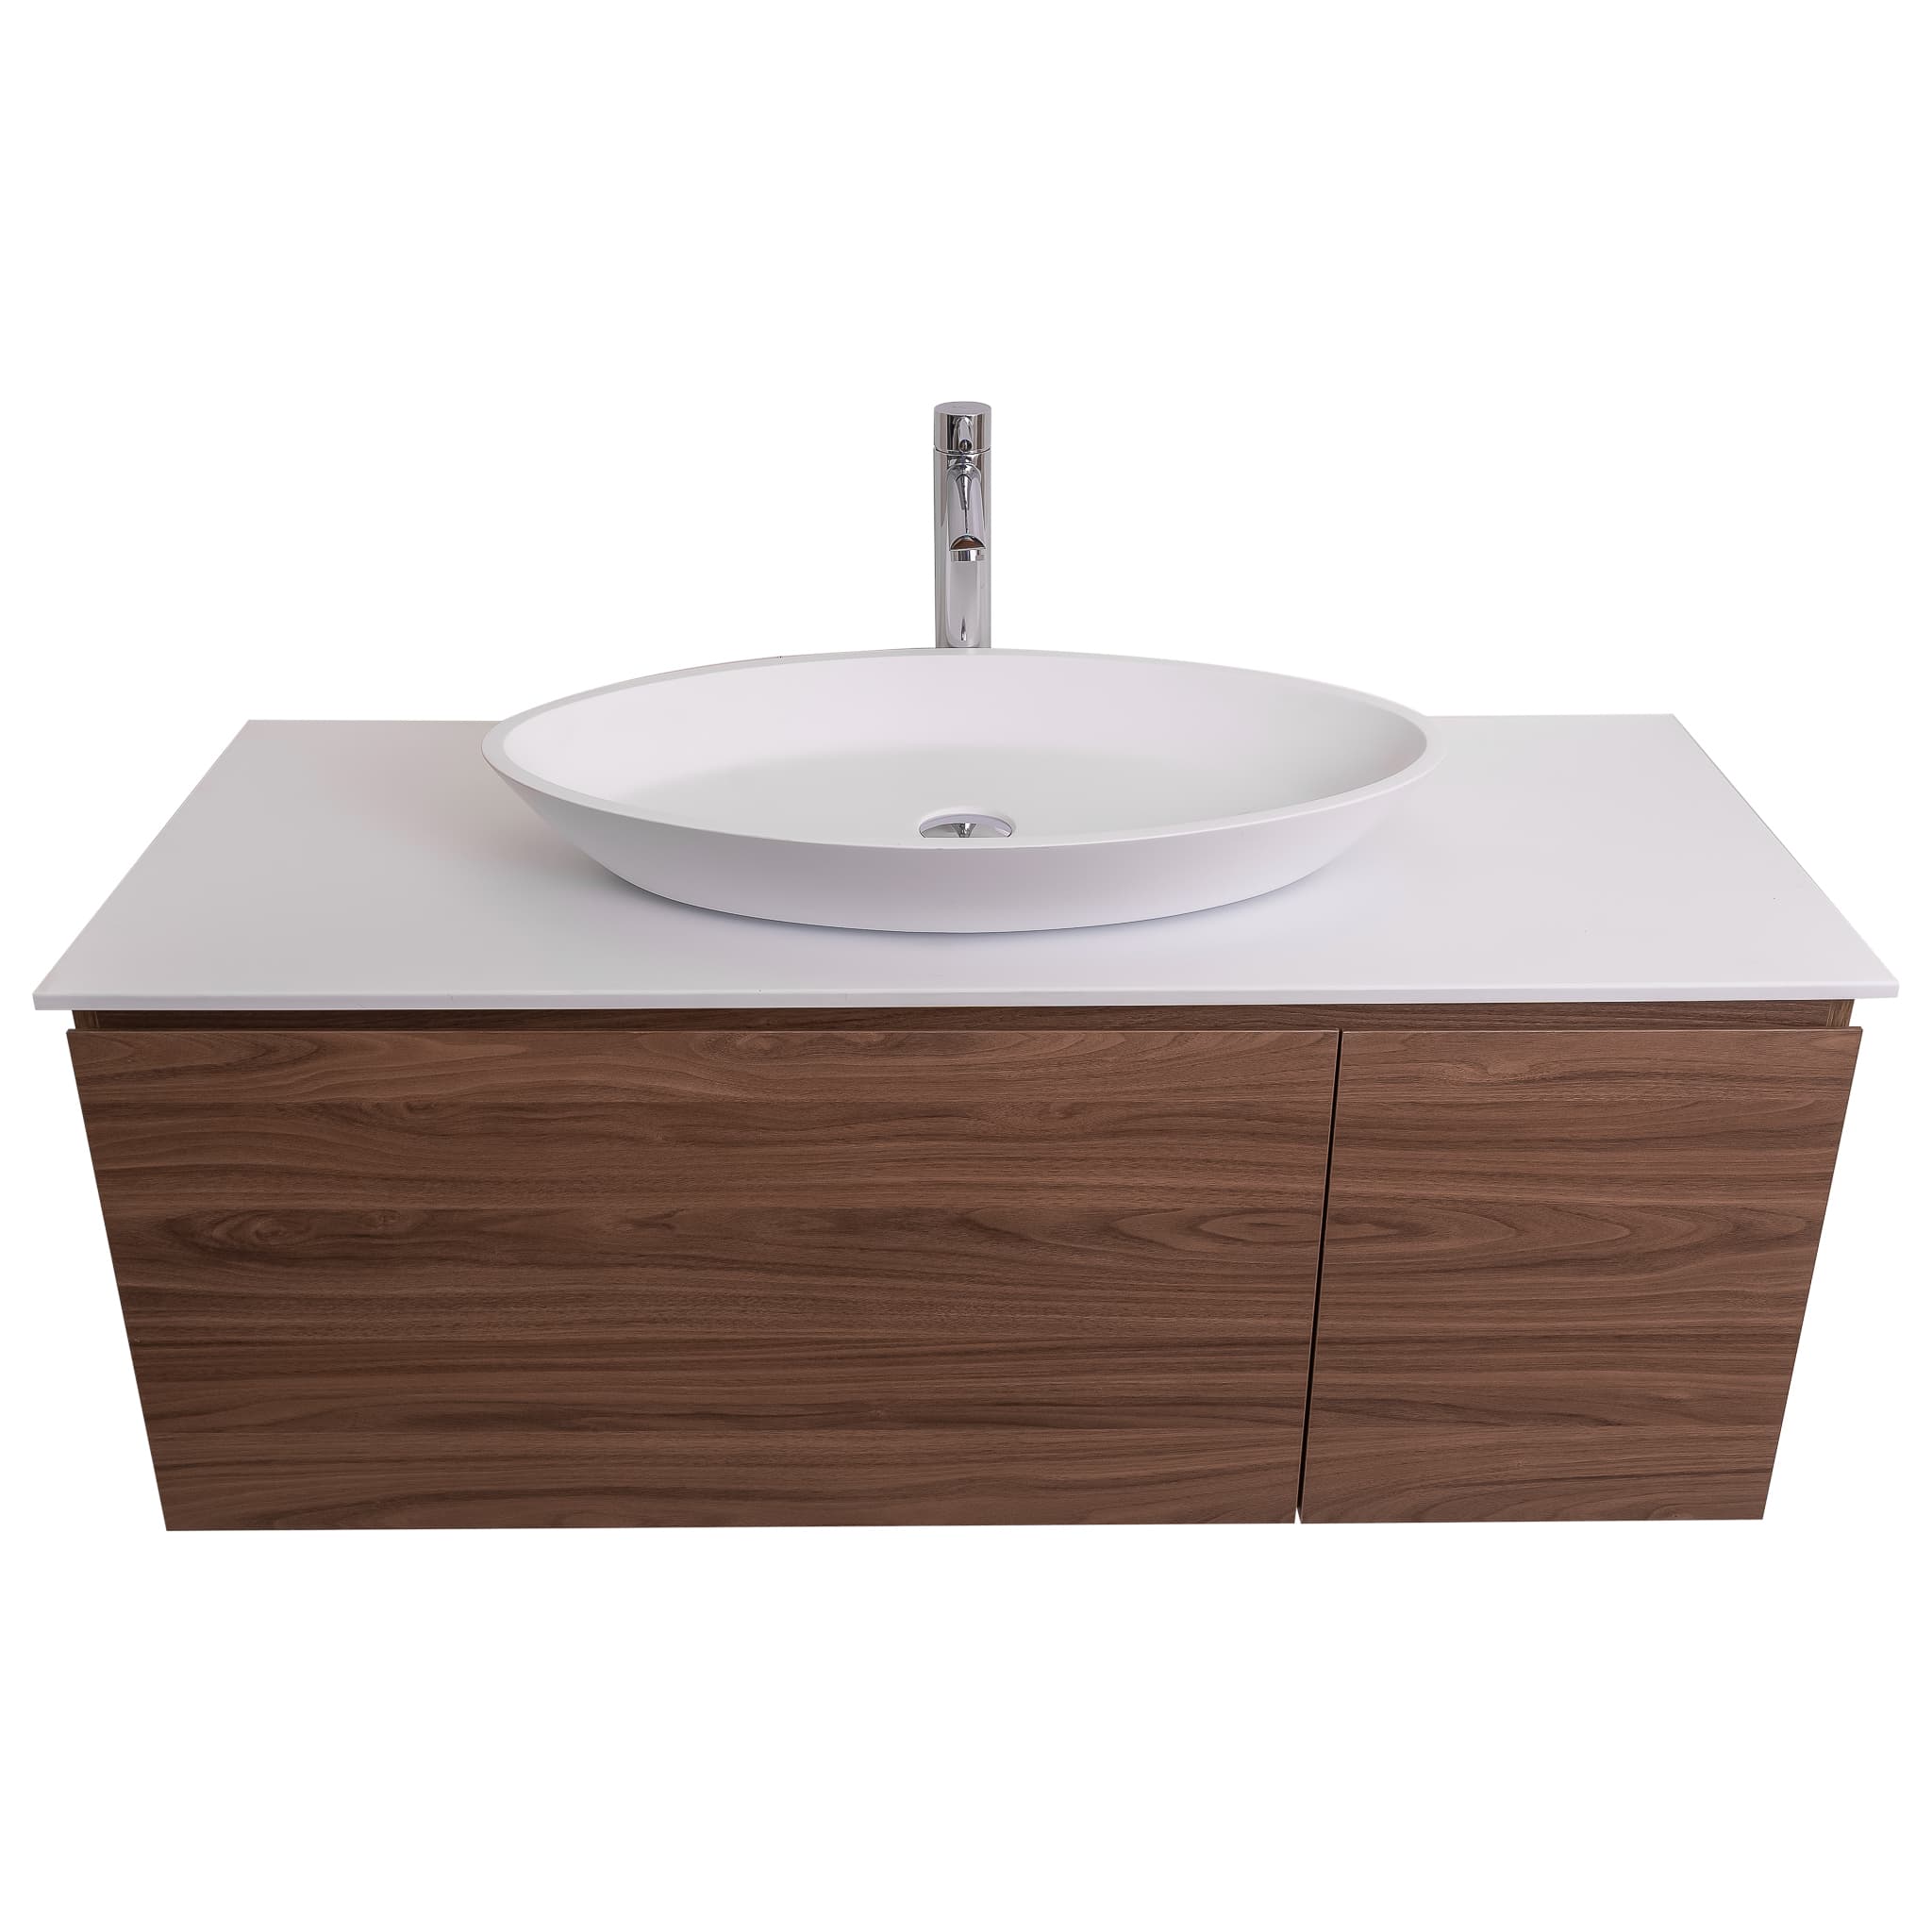 Venice 47.5 Walnut Wood Texture Cabinet, Solid Surface Flat White Counter And Oval Solid Surface White Basin 1305, Wall Mounted Modern Vanity Set